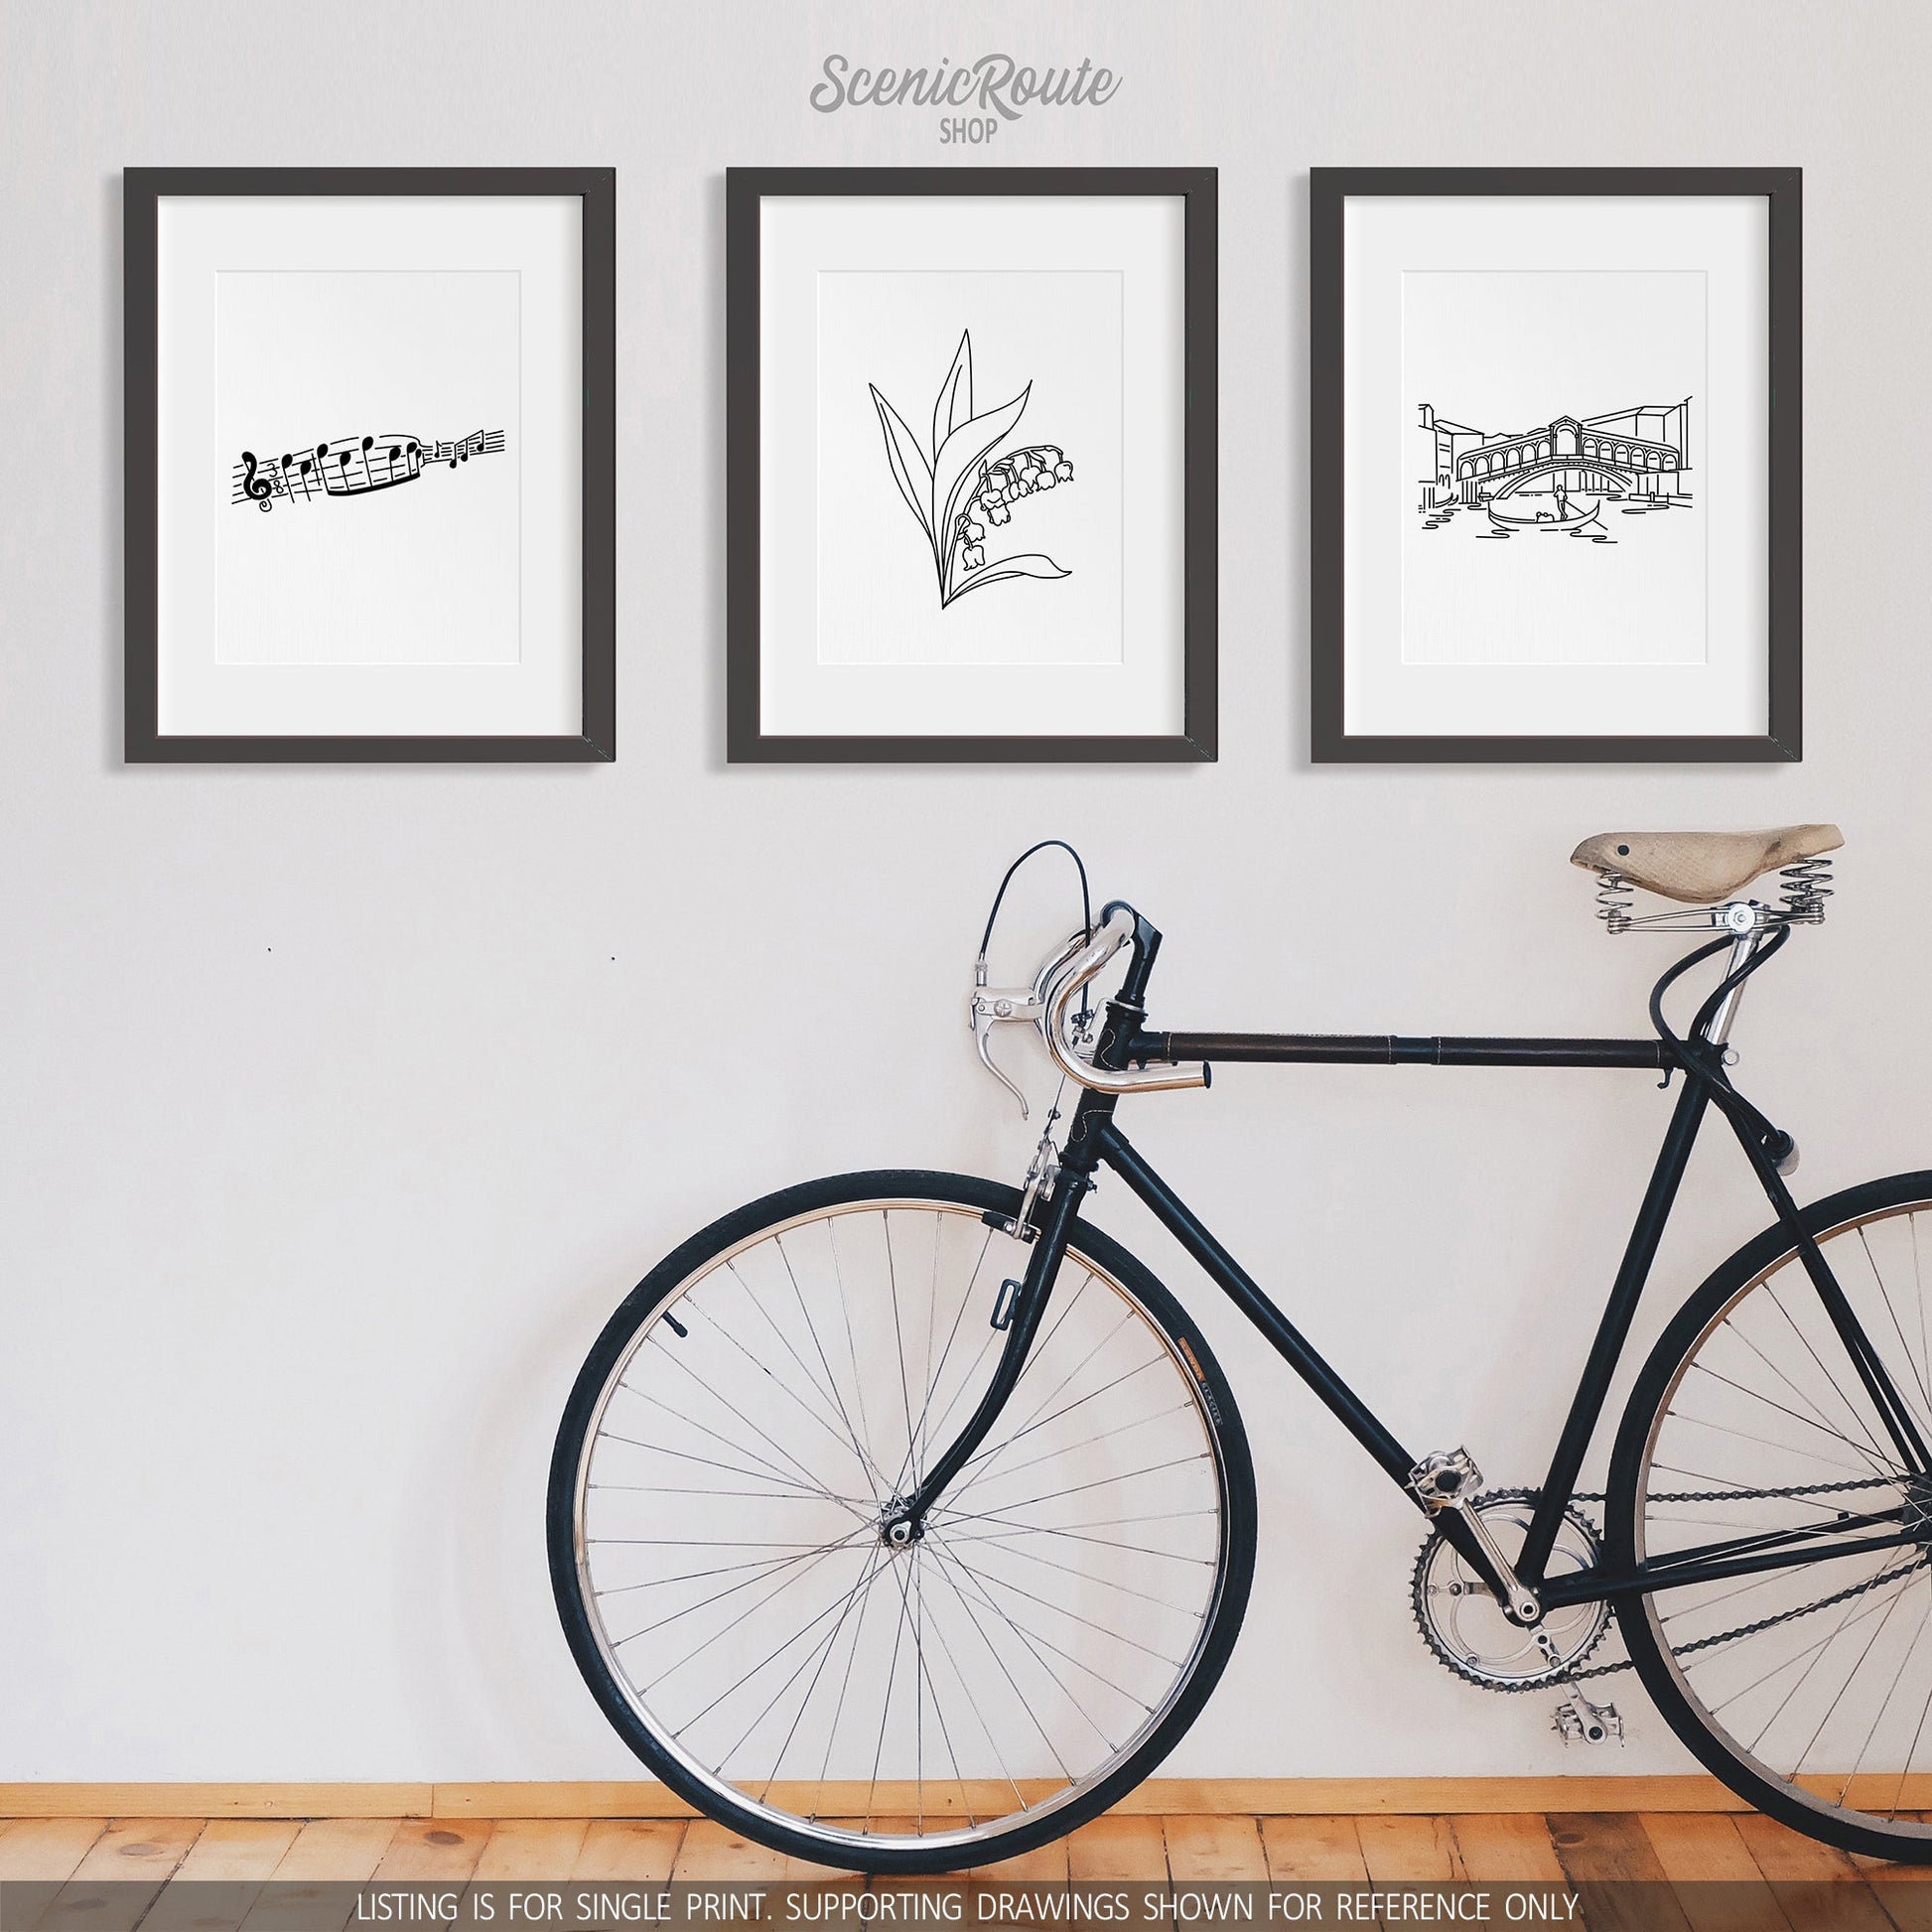 A group of three framed drawings on a white wall above a bicycle. The line art drawings include Music Notes, Lily of the Valley Flower, and the Rialto Bridge